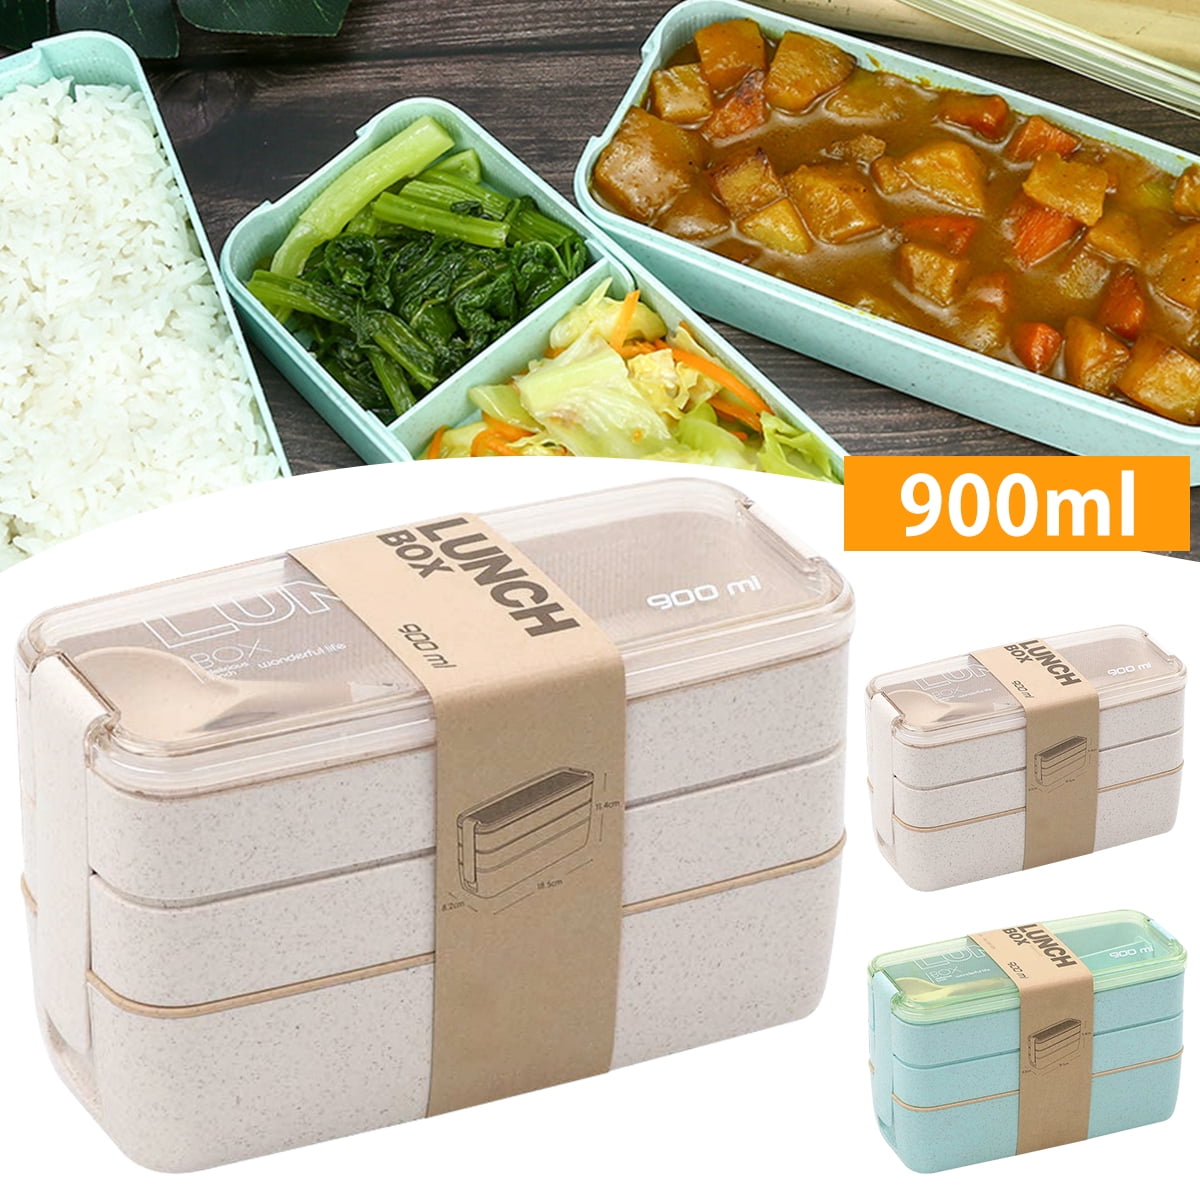  Rarapop 3 Pack Stackable Bento Box Adult Japanese Lunch Box Kit  with Spoon & Fork, 3-In-1 Compartment Wheat Straw Meal Prep Containers  (Green/Pink/Beige): Home & Kitchen